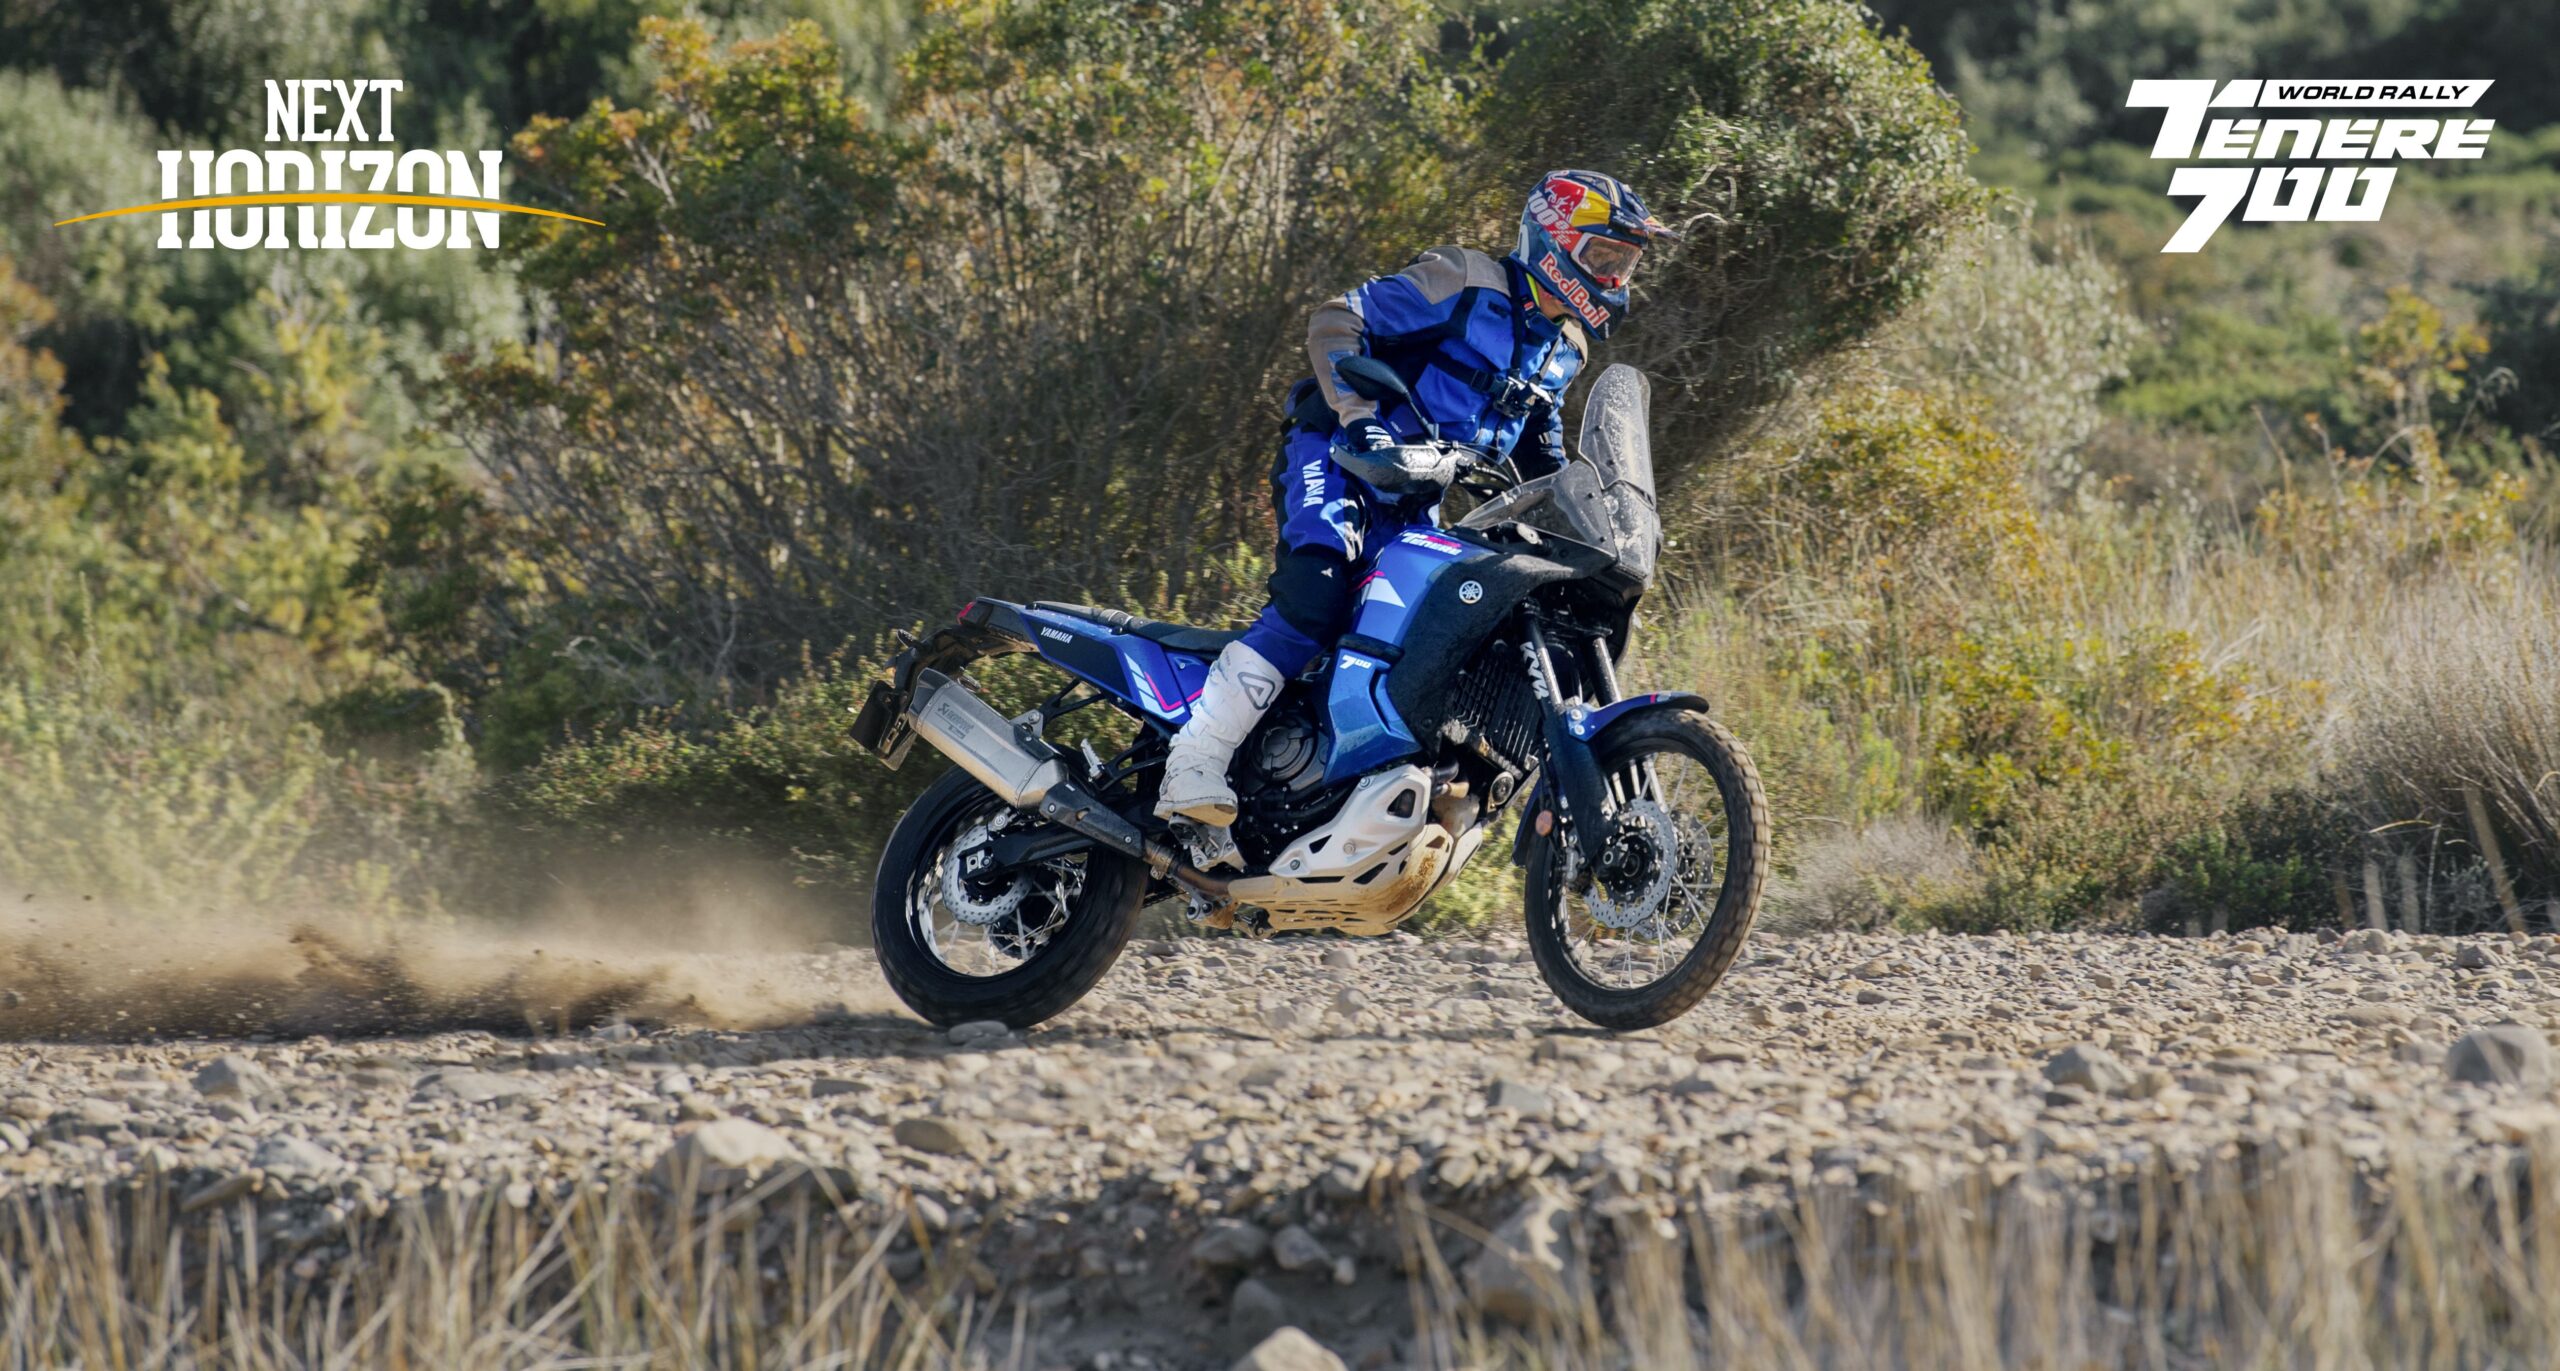 <strong>Yamaha Motor Europe launches three new editions of the Ténéré 700: World Rally, Extreme Edition and Explore Edition. Creativity developed by the Armando Testa Group.</strong>